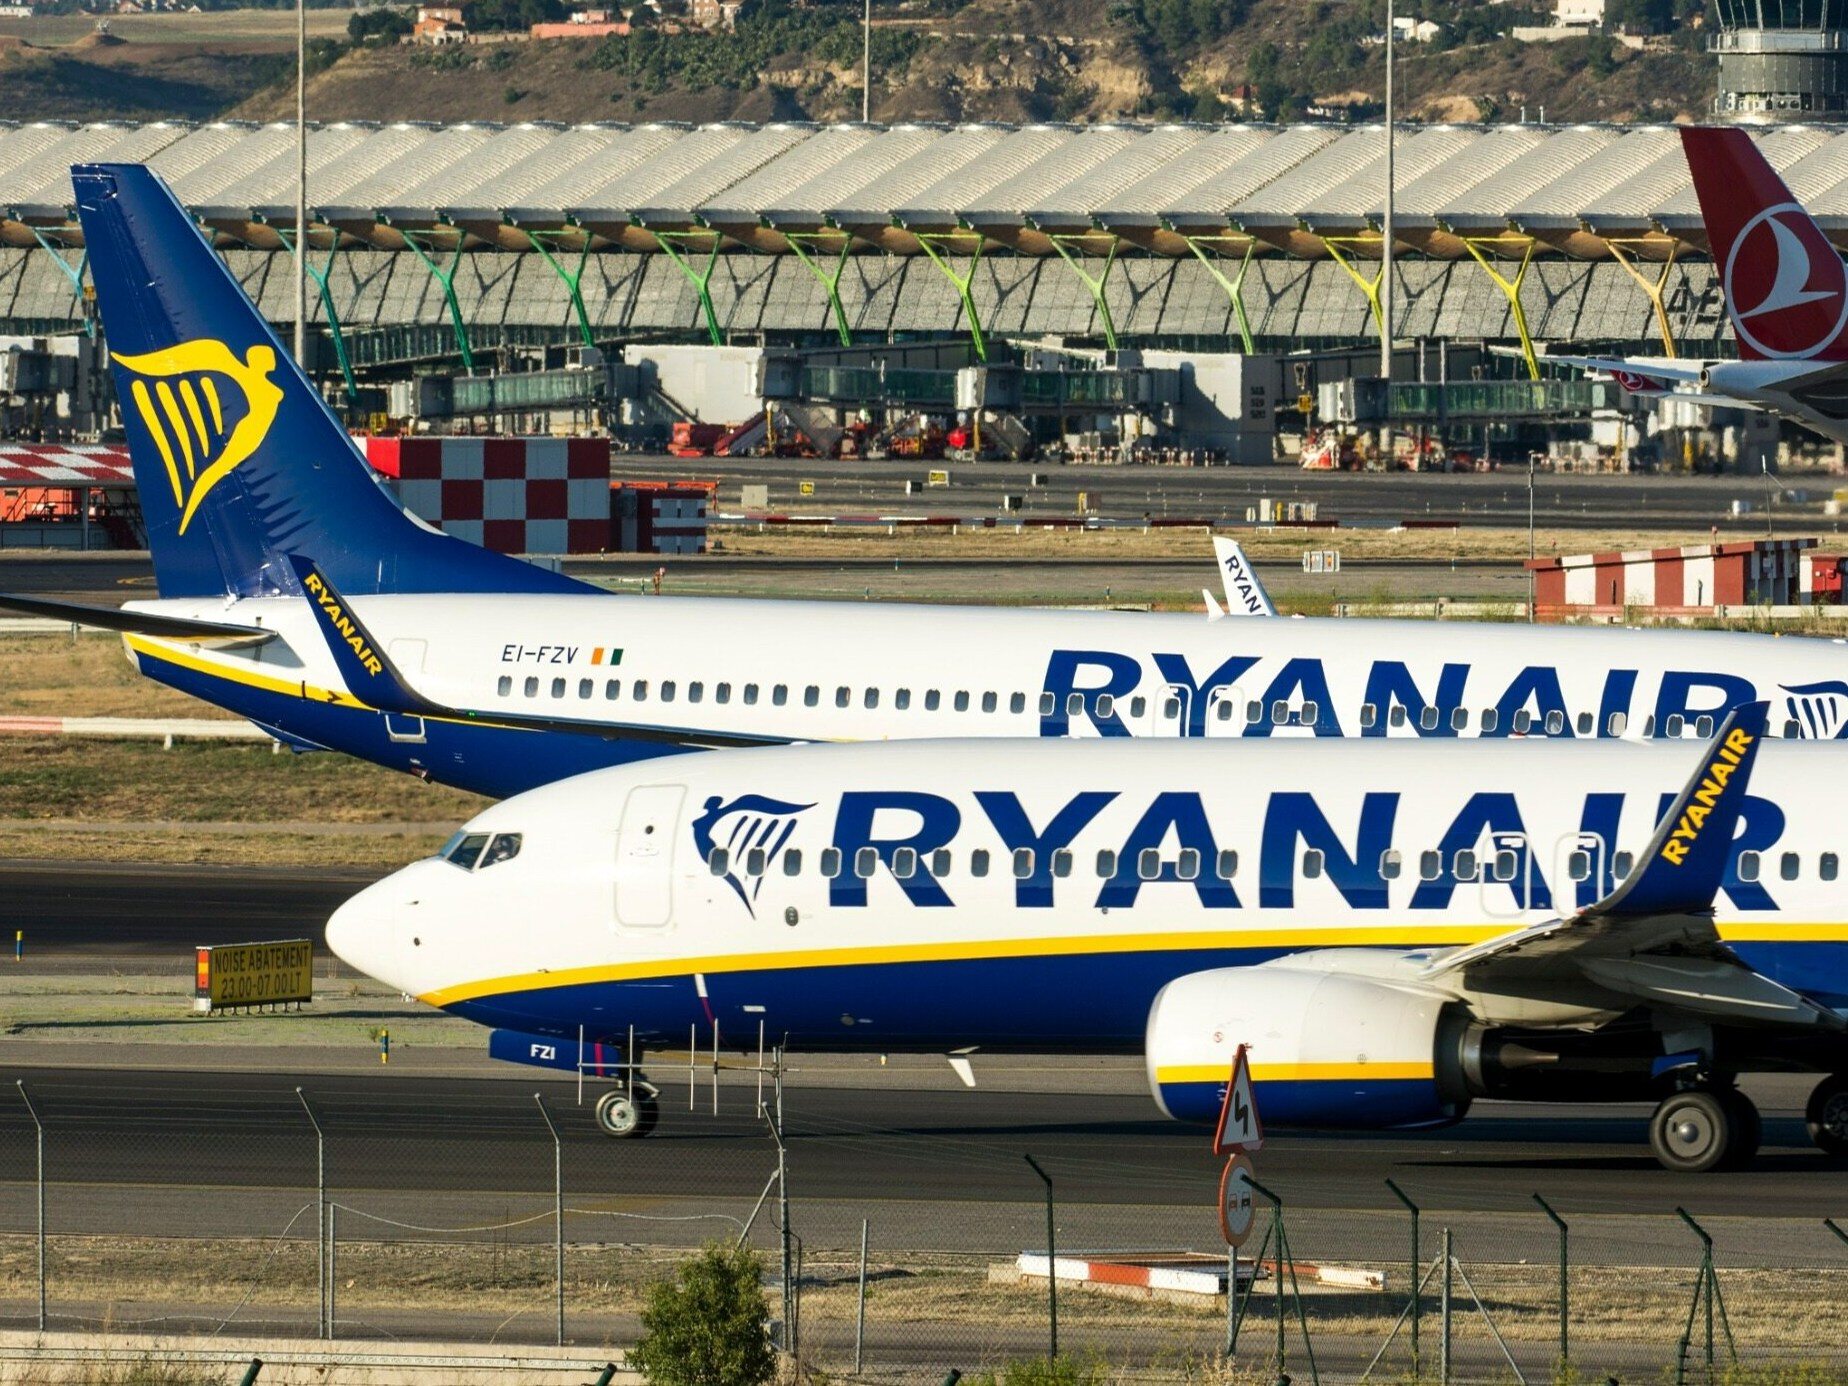 Ryanair has launched another promotion.  Reduces ticket prices by 15%.